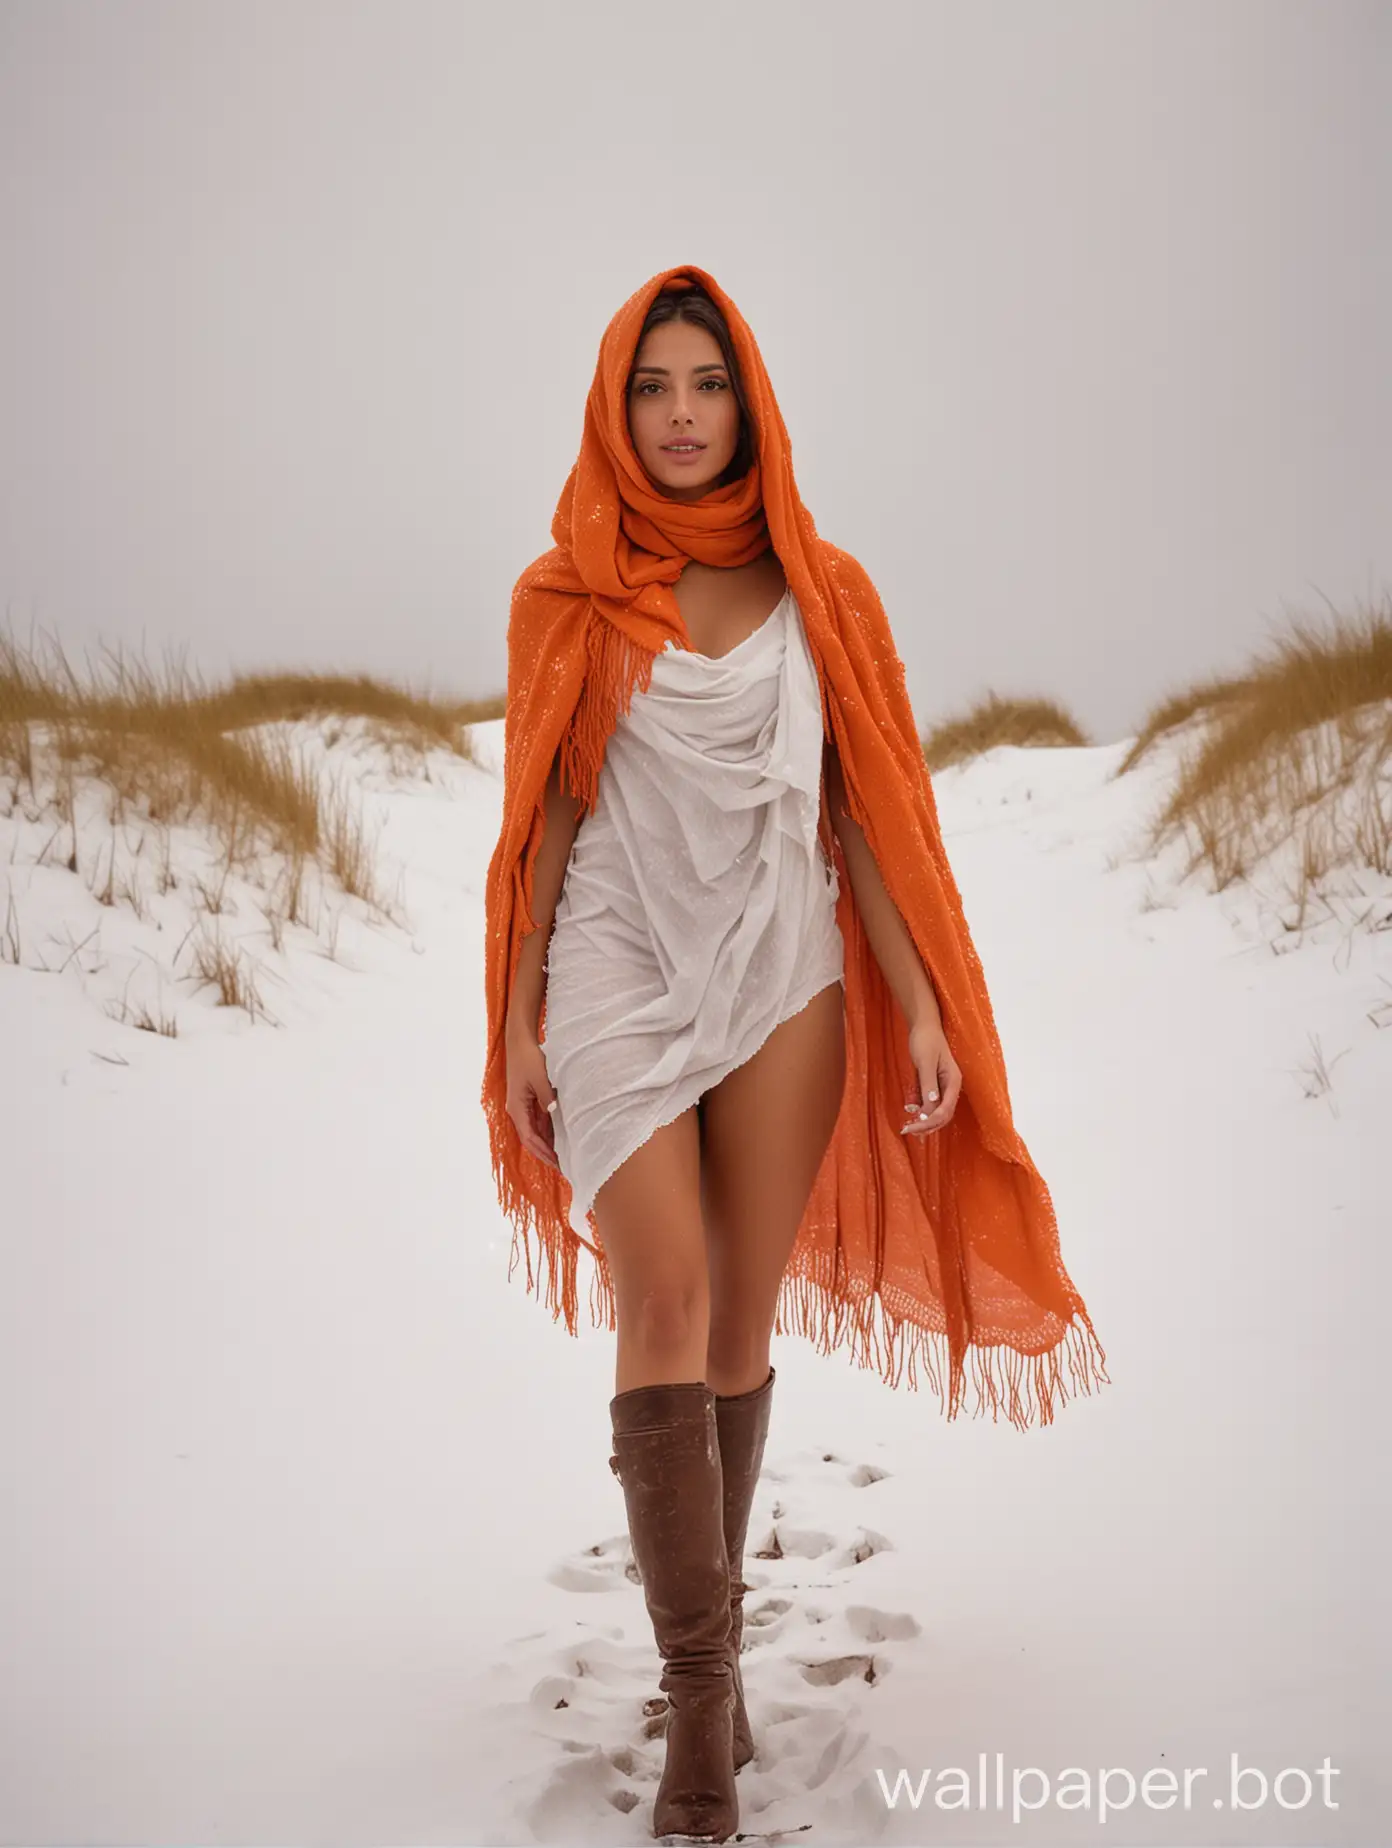 Brazilian girl full body nude wearing a white face cloth covering nose and mouth and weather-worn orange shawl over her head and strapped high heels with background of vibrant winter snow dunes